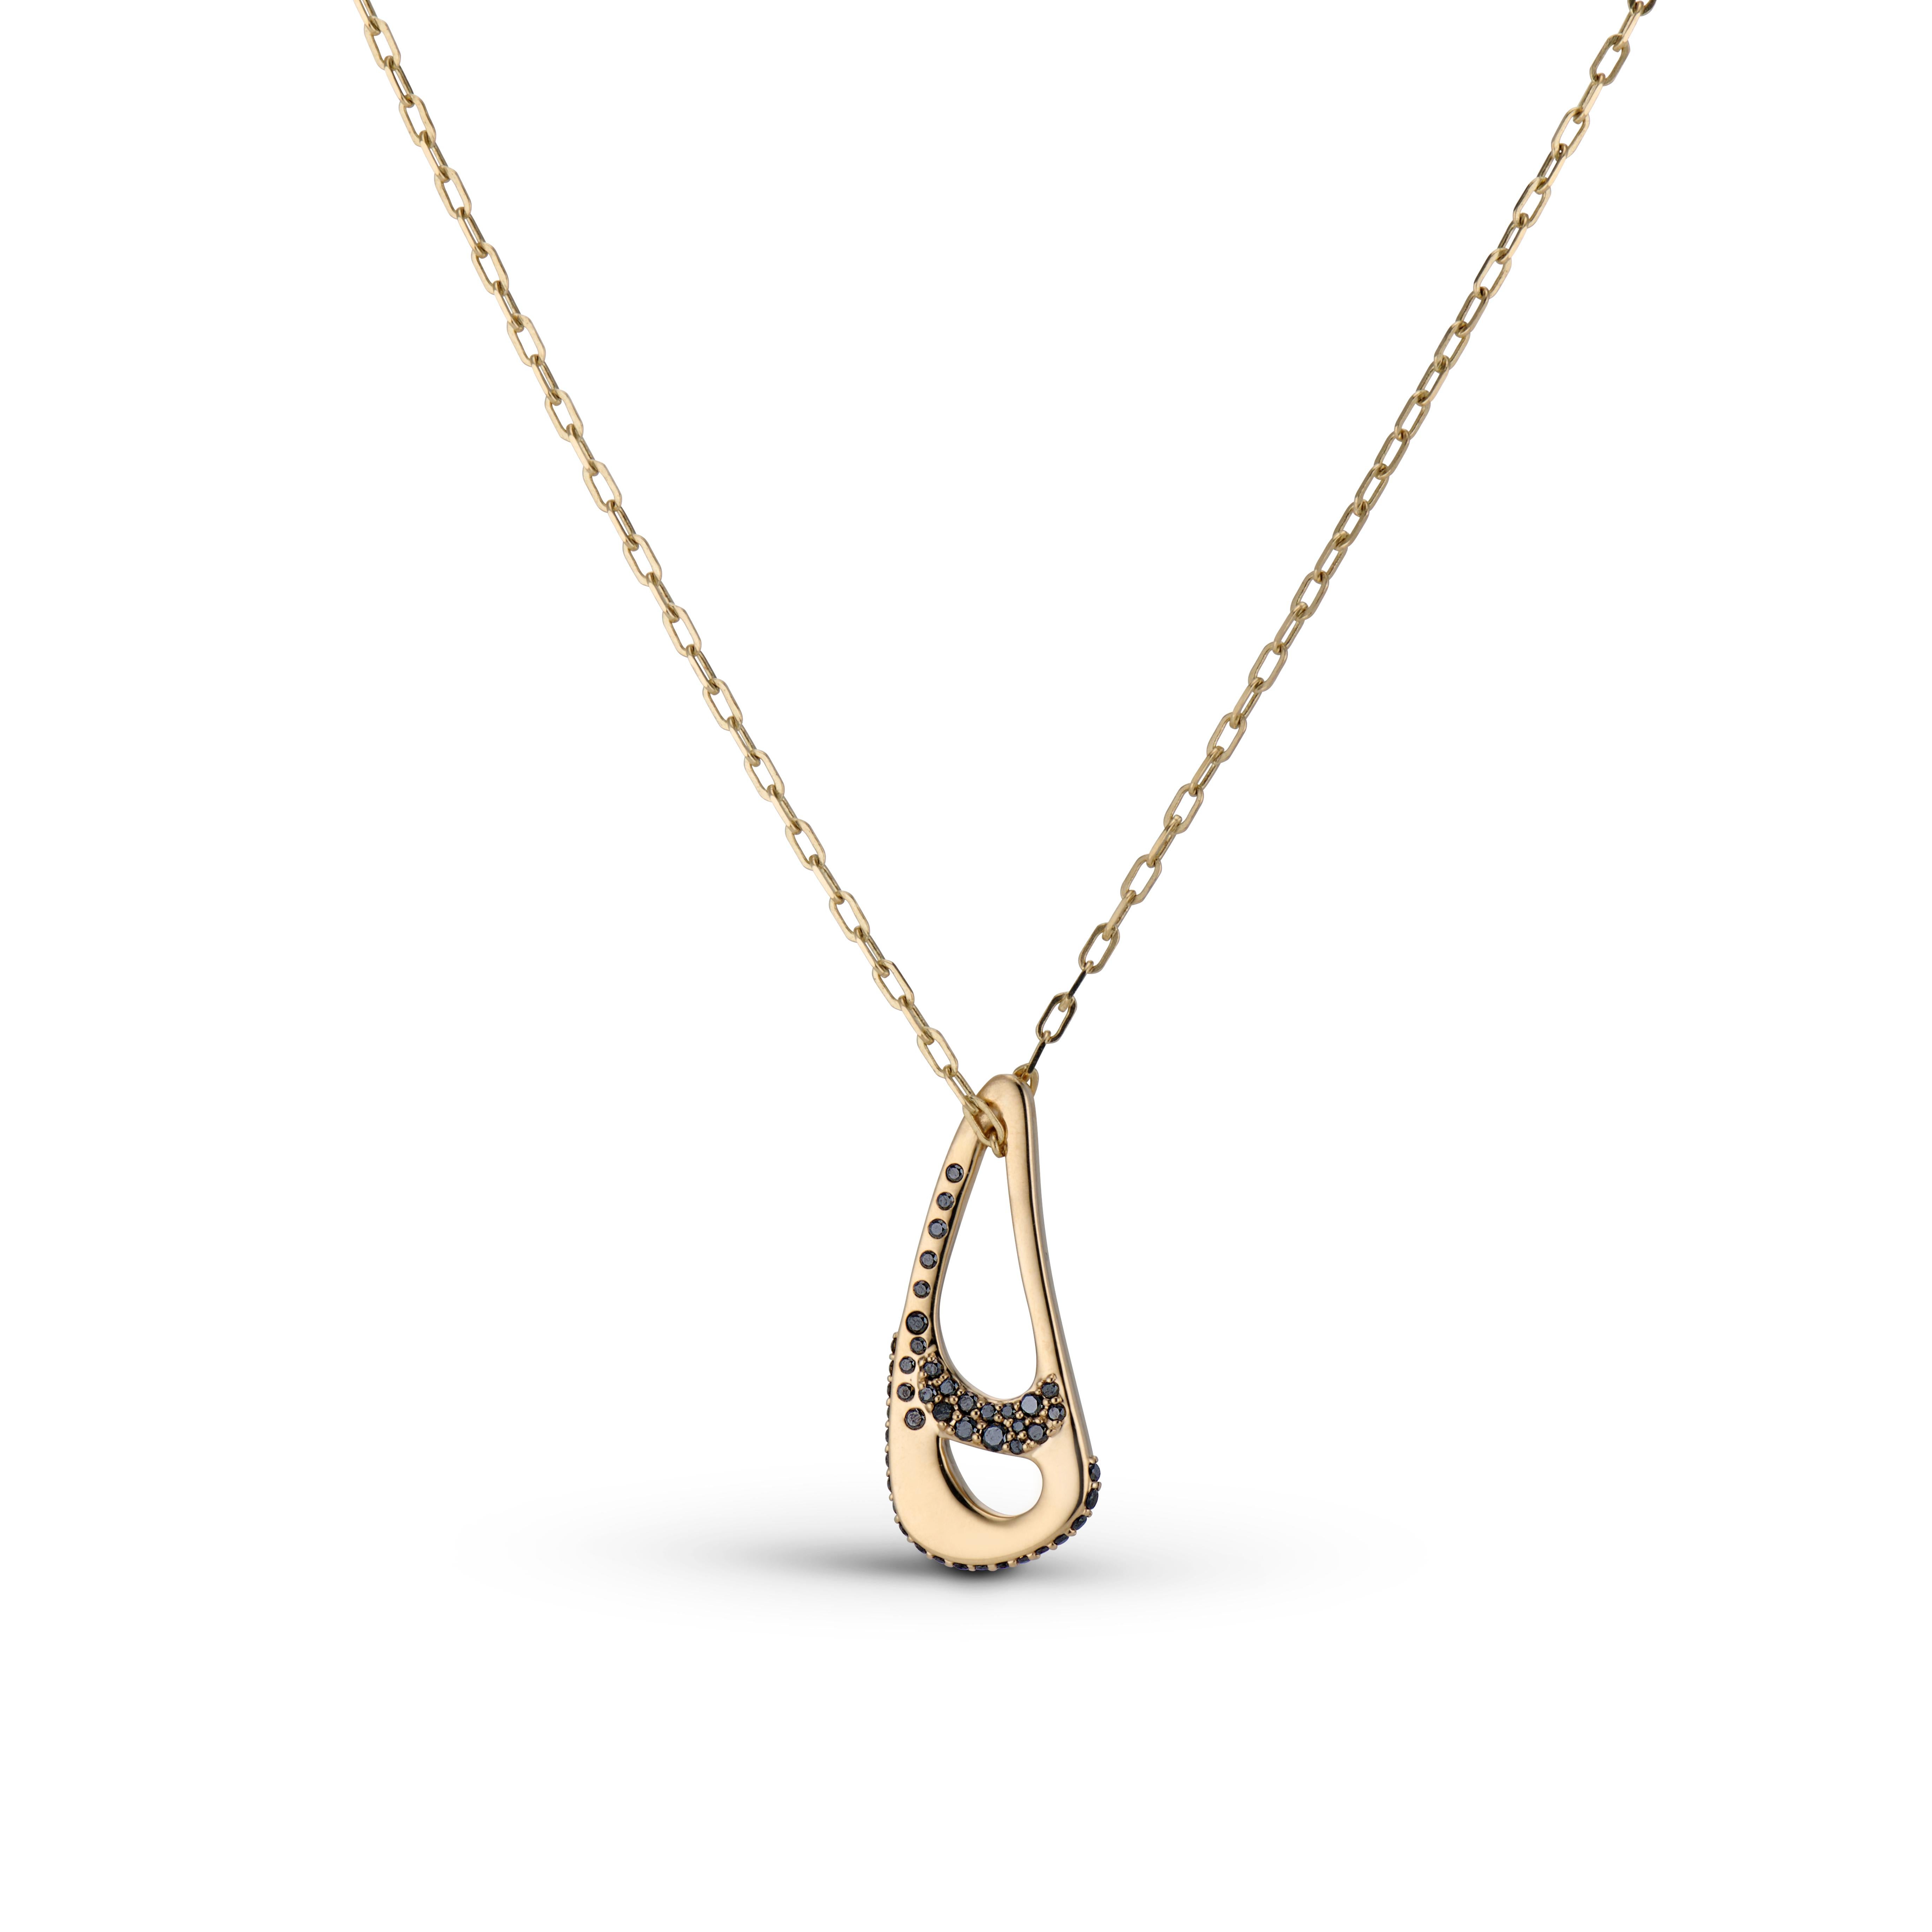 he Petite BALANCE pendant embodies the desire for stability in one's life.  As contemporary life pulls us into so many different directions, we need to be reminded to re-center our being and find the equilibrium we all need.  

Here the 18kt gold